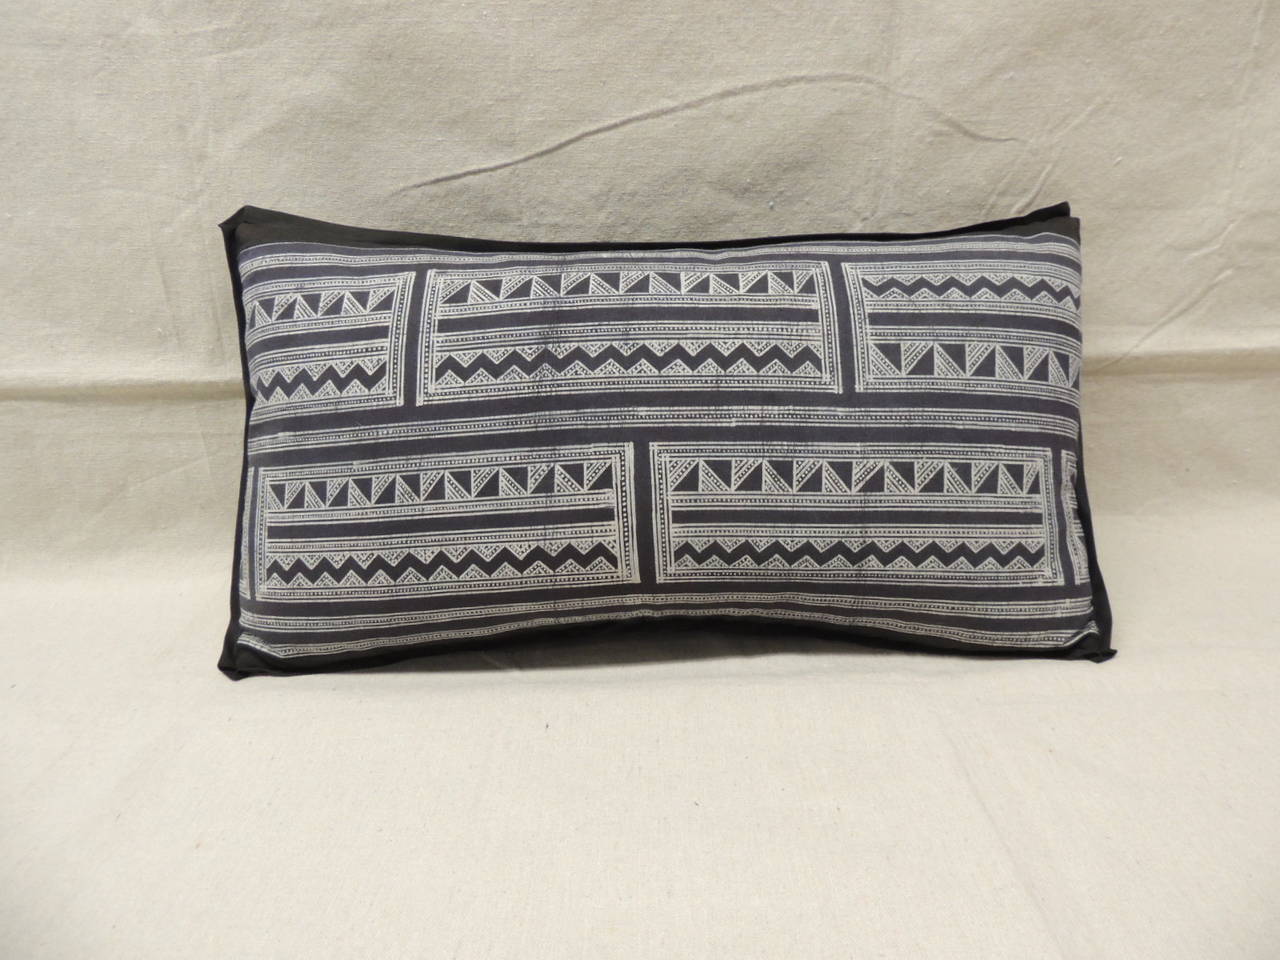 Dark indigo (almost black) tribal design batik hand-blocked lumbar pillow with matte black linen backing and custom black flat trim all around.
Decorative pillows handcrafted and designed in the USA. Closure by stitch (no zipper closure) with a